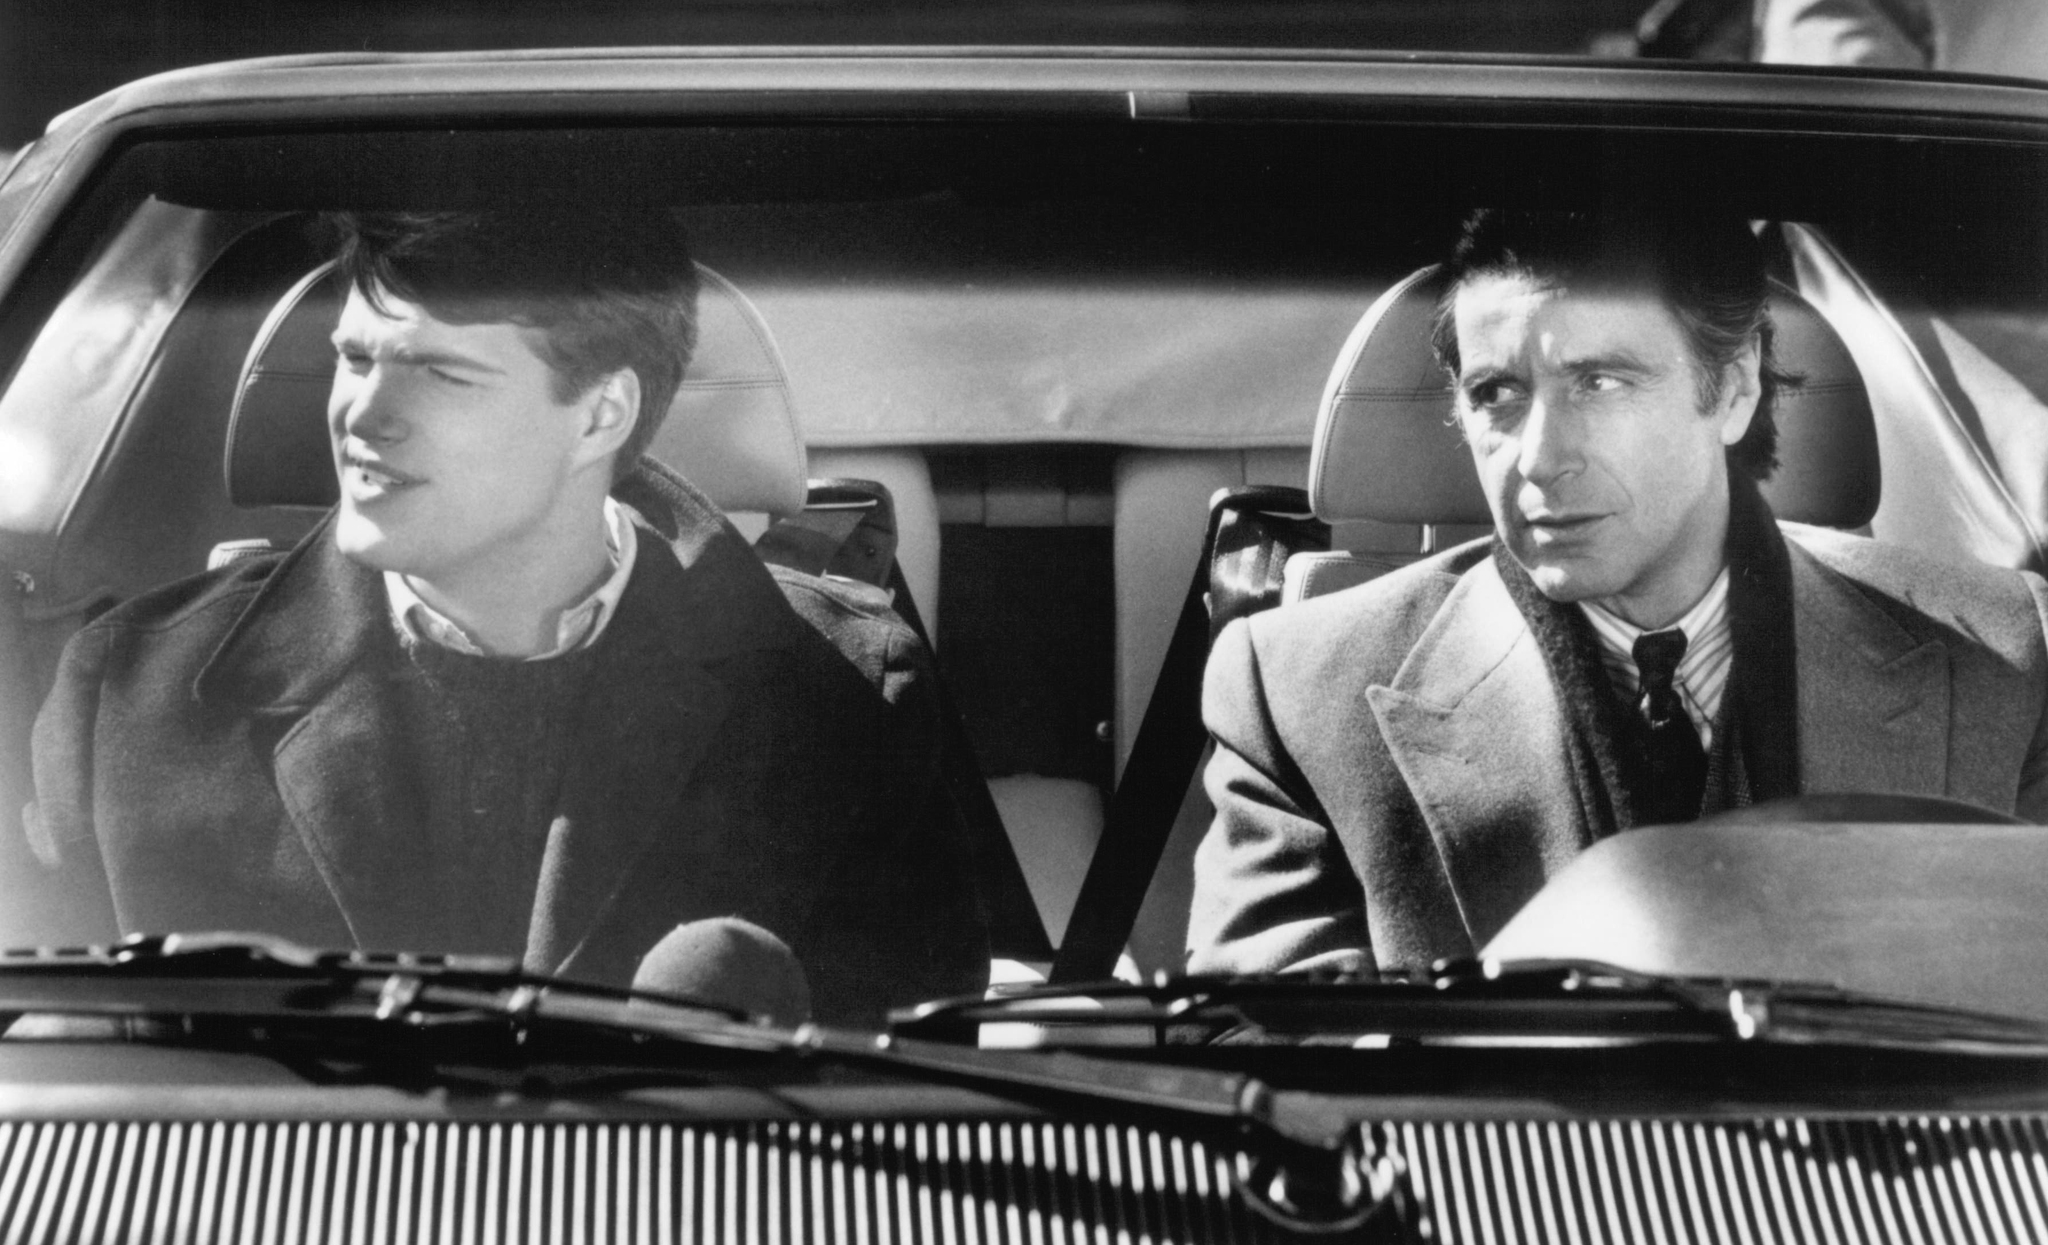 Still of Al Pacino and Chris O'Donnell in Scent of a Woman (1992)